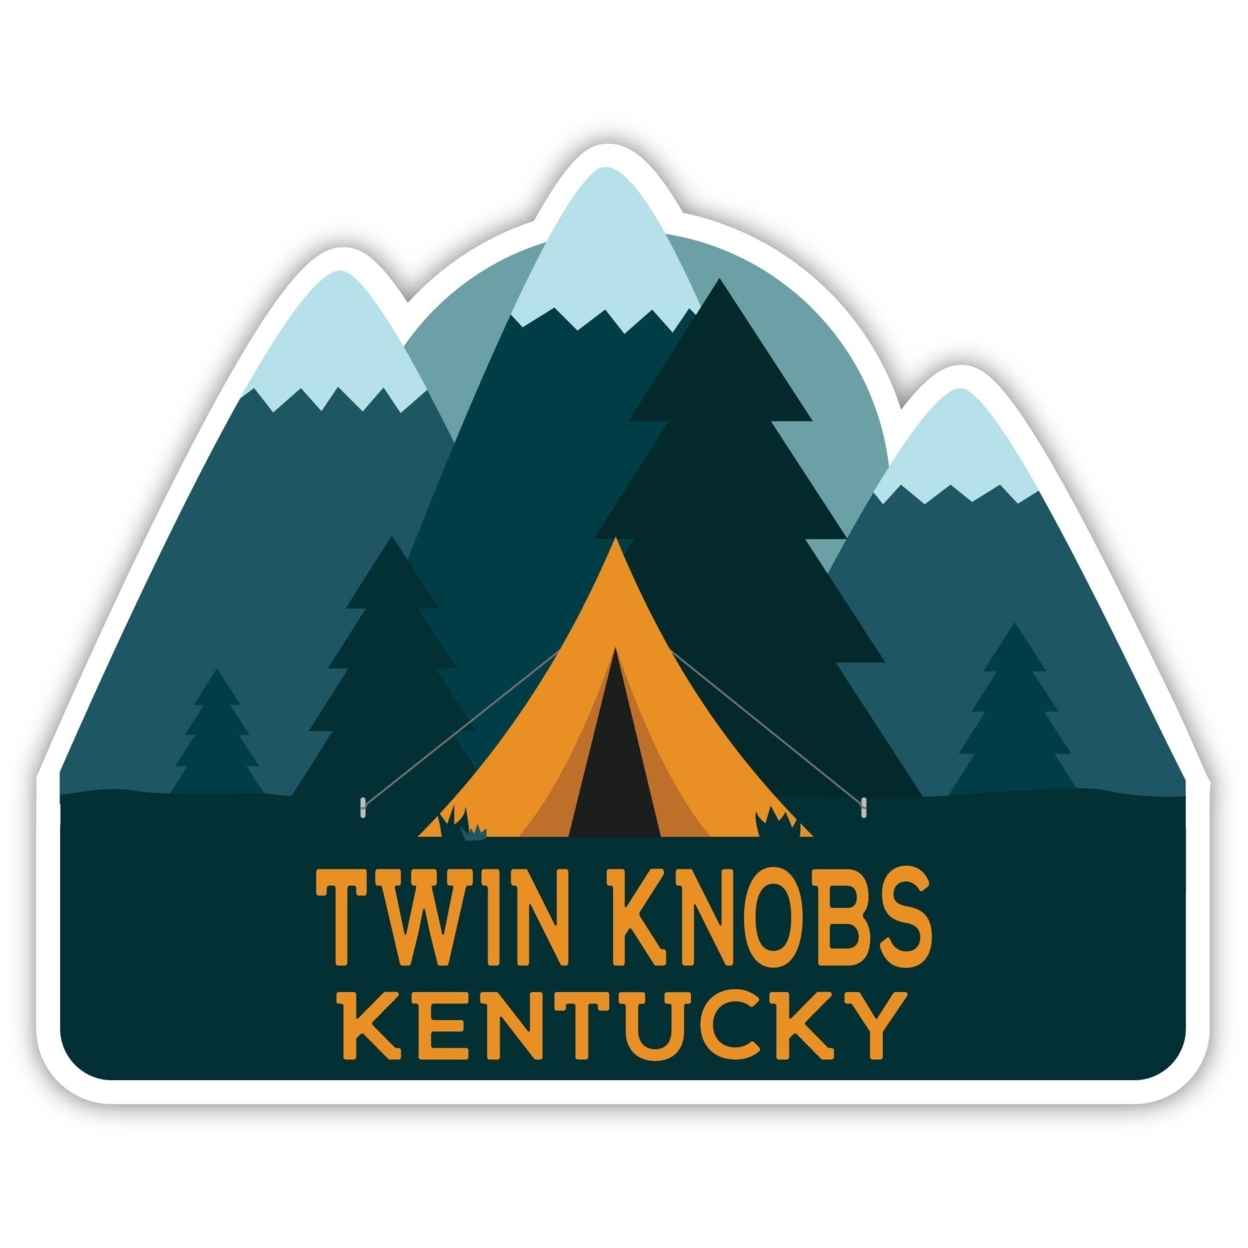 Twin Knobs Kentucky Souvenir Decorative Stickers (Choose Theme And Size) - Single Unit, 2-Inch, Tent